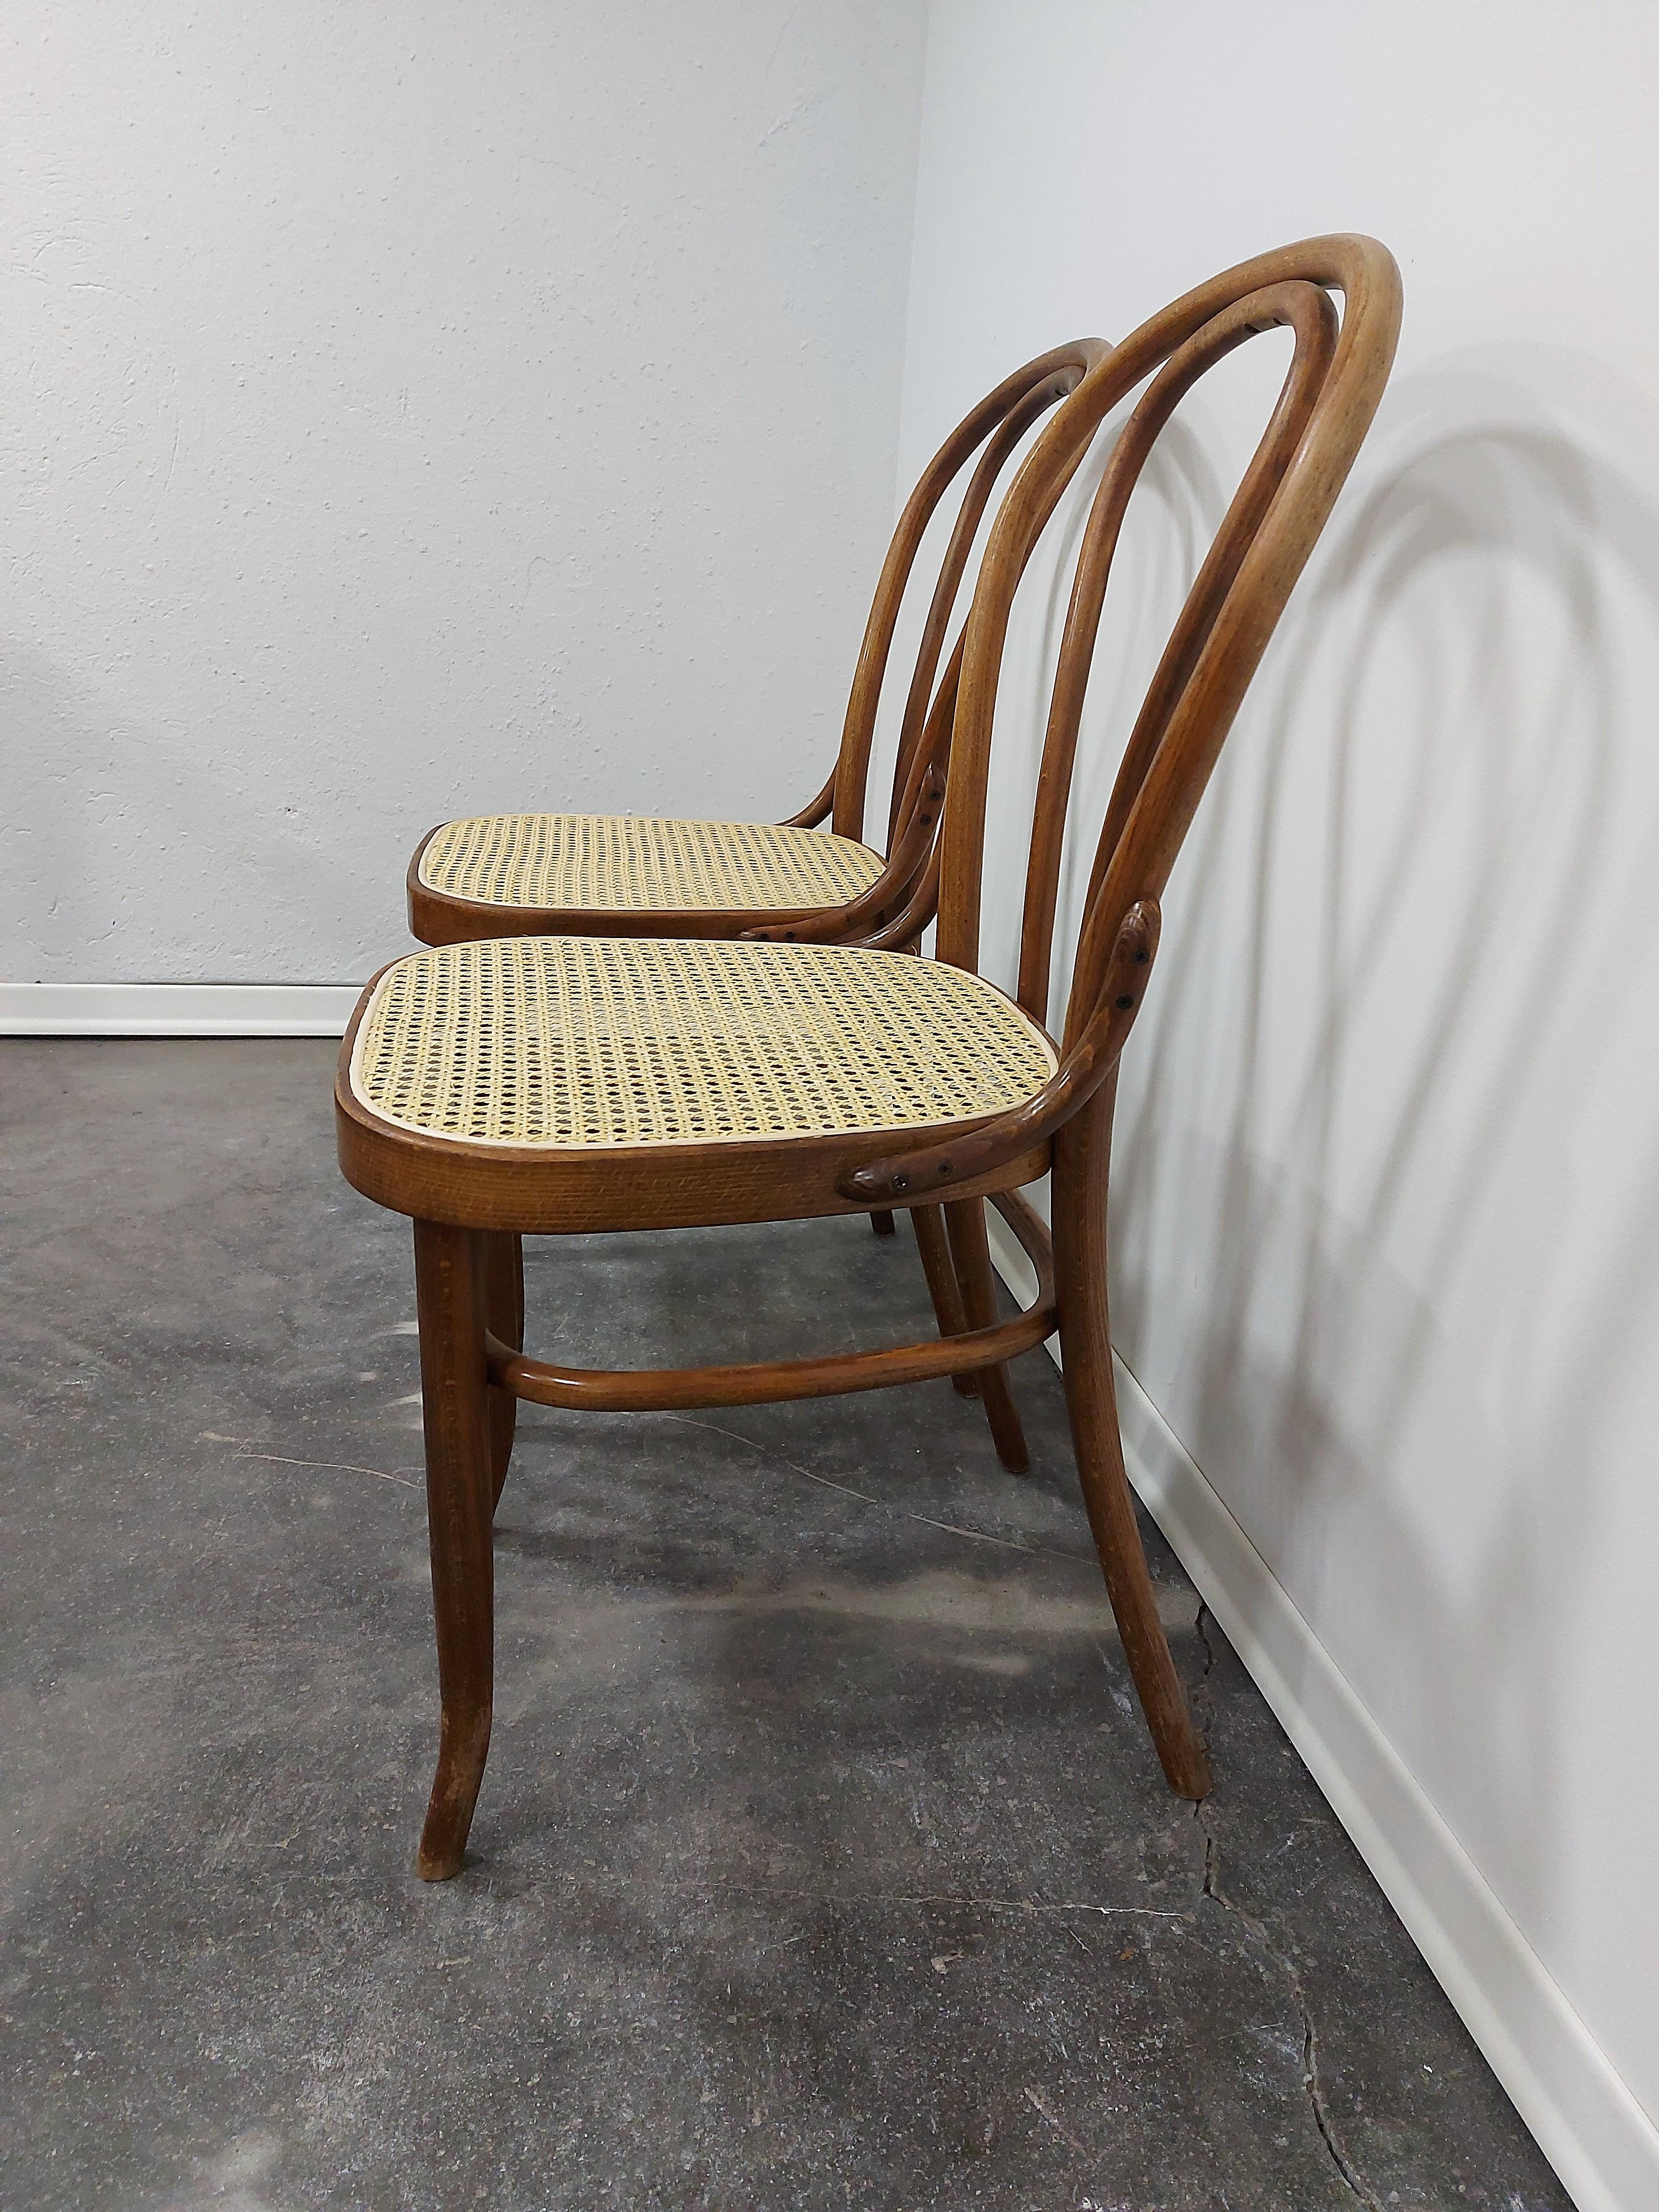 Mid-Century Modern Chair, Bentwood 1960s, 1 of 3 For Sale